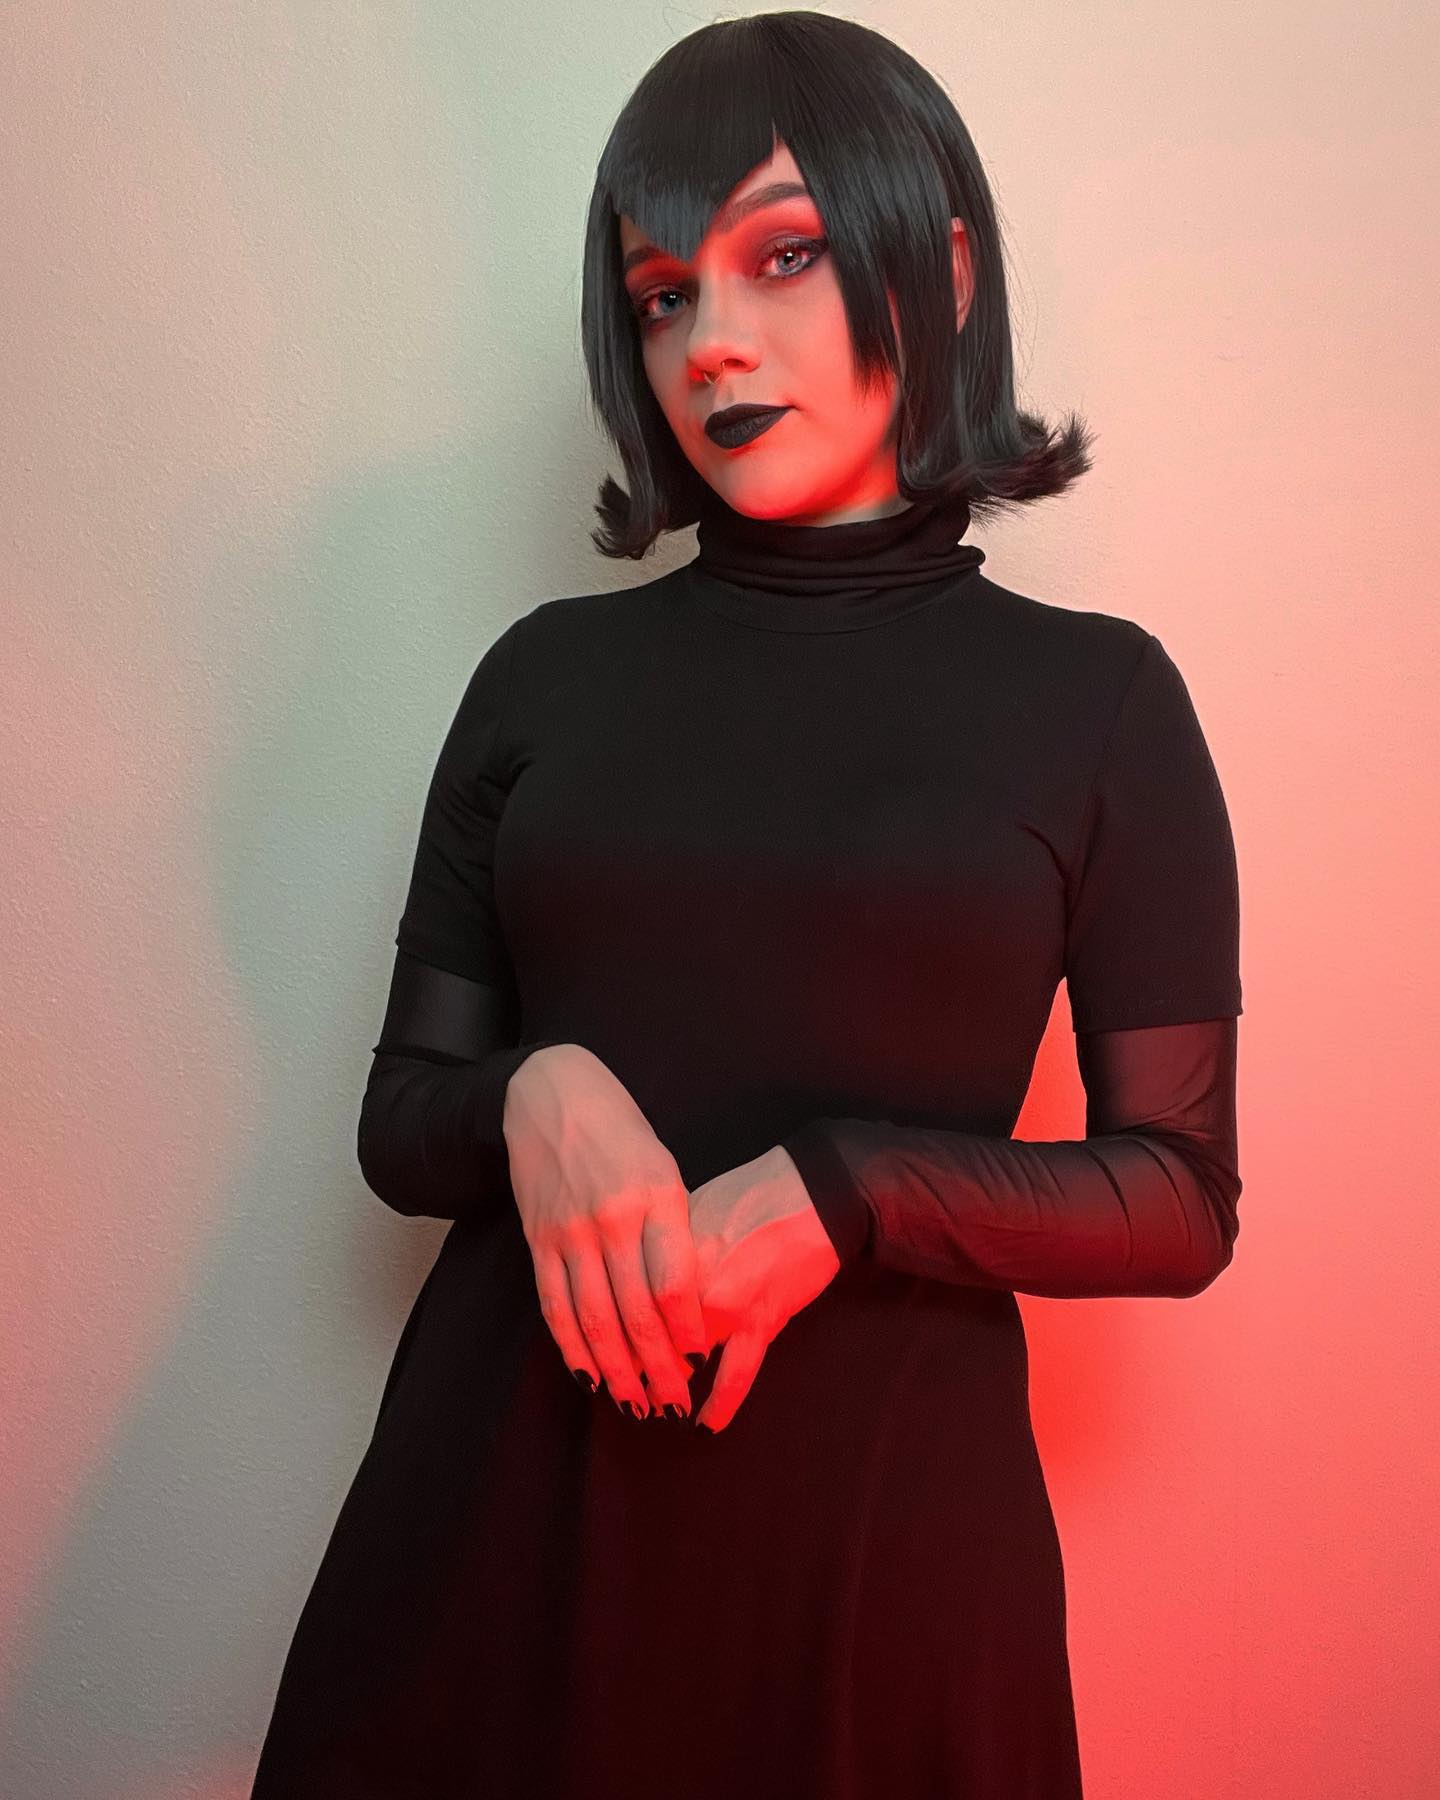 Hi 🧍🏼 it’s been a while. I needed to take some time away last year to focus on my mental health, but I’m excited to start making content again. If you’re still here, thanks. 👹🖤
#mavis #mavisdracula #maviscosplay #hoteltransylvania #hoteltransylvaniacosplay #cosplay